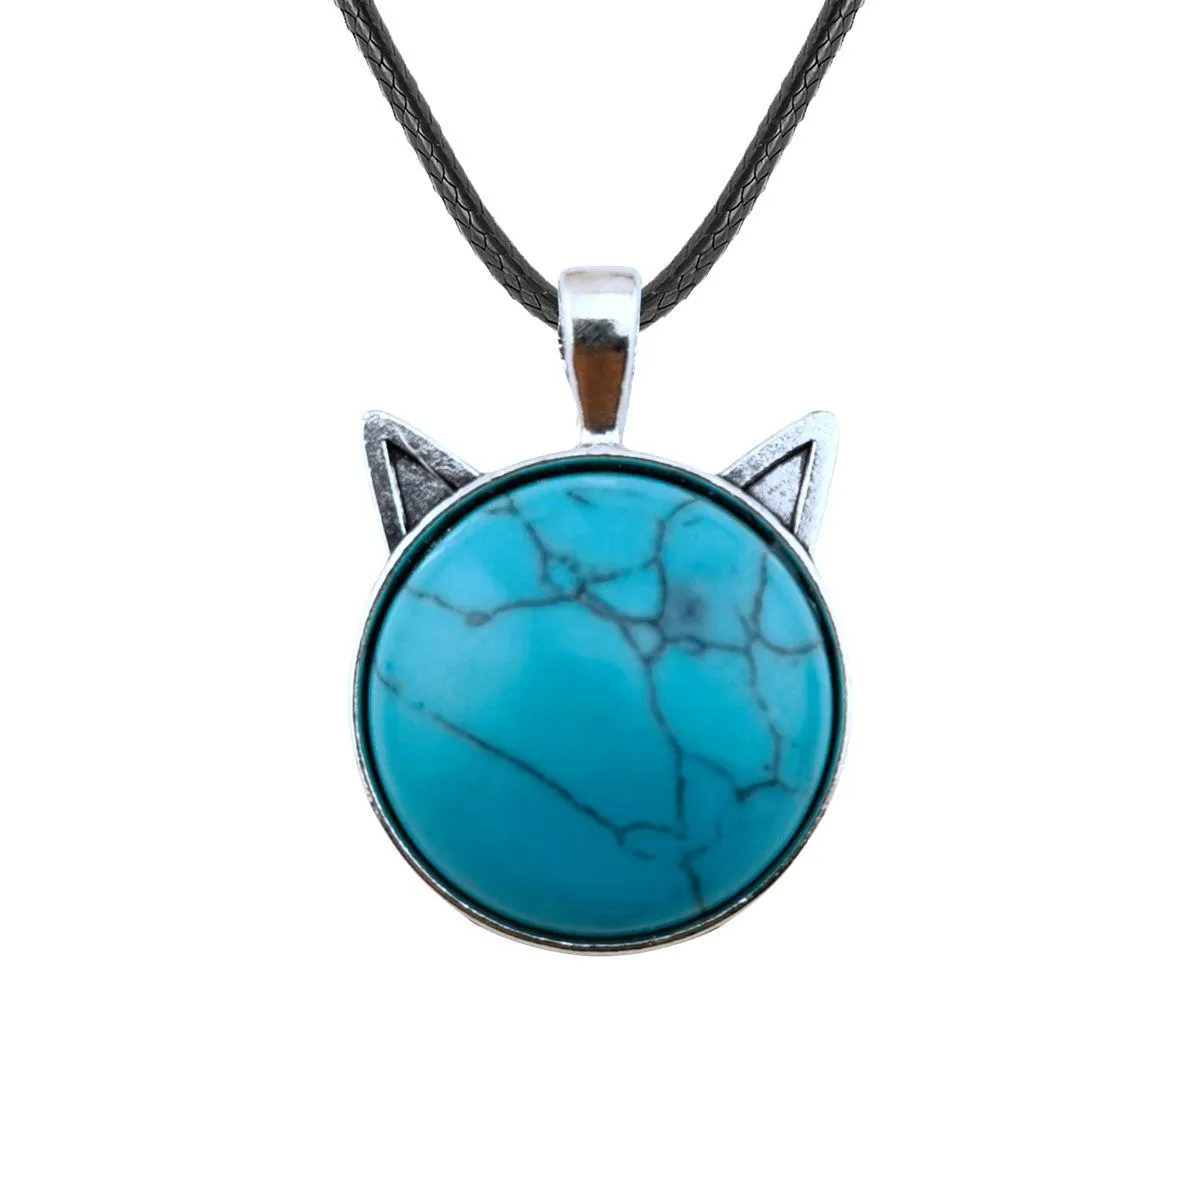 Pendant Necklaces Cute Cat Head Pendant Necklace With Natural Healing Crystal Belt Leather Rope Birthday Gift For Friends Jewelry Neck Dhajl